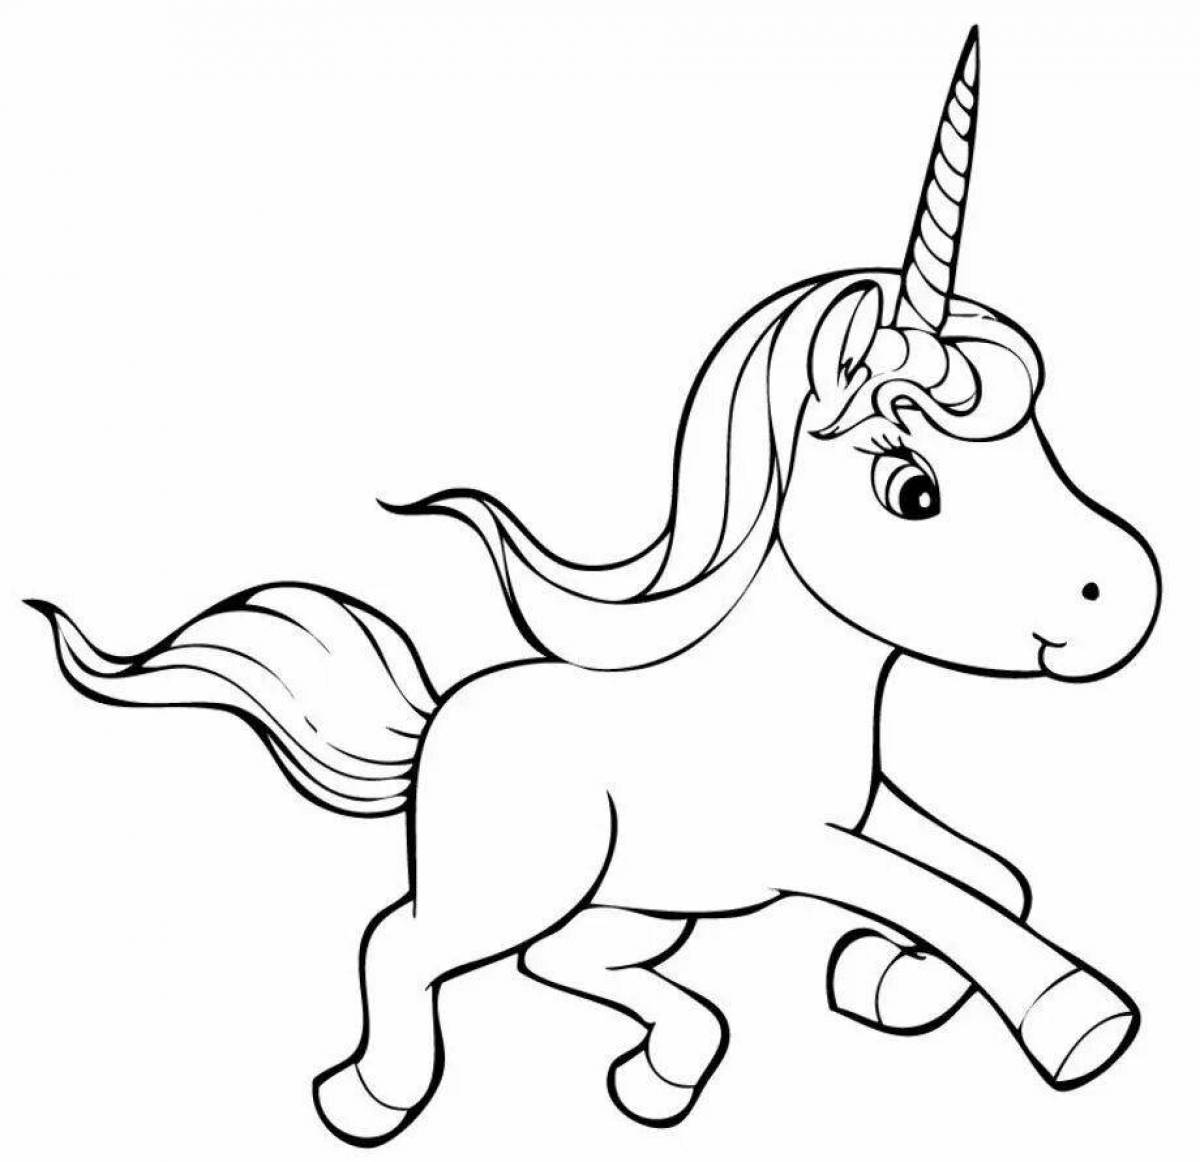 A fascinating coloring drawing of a unicorn